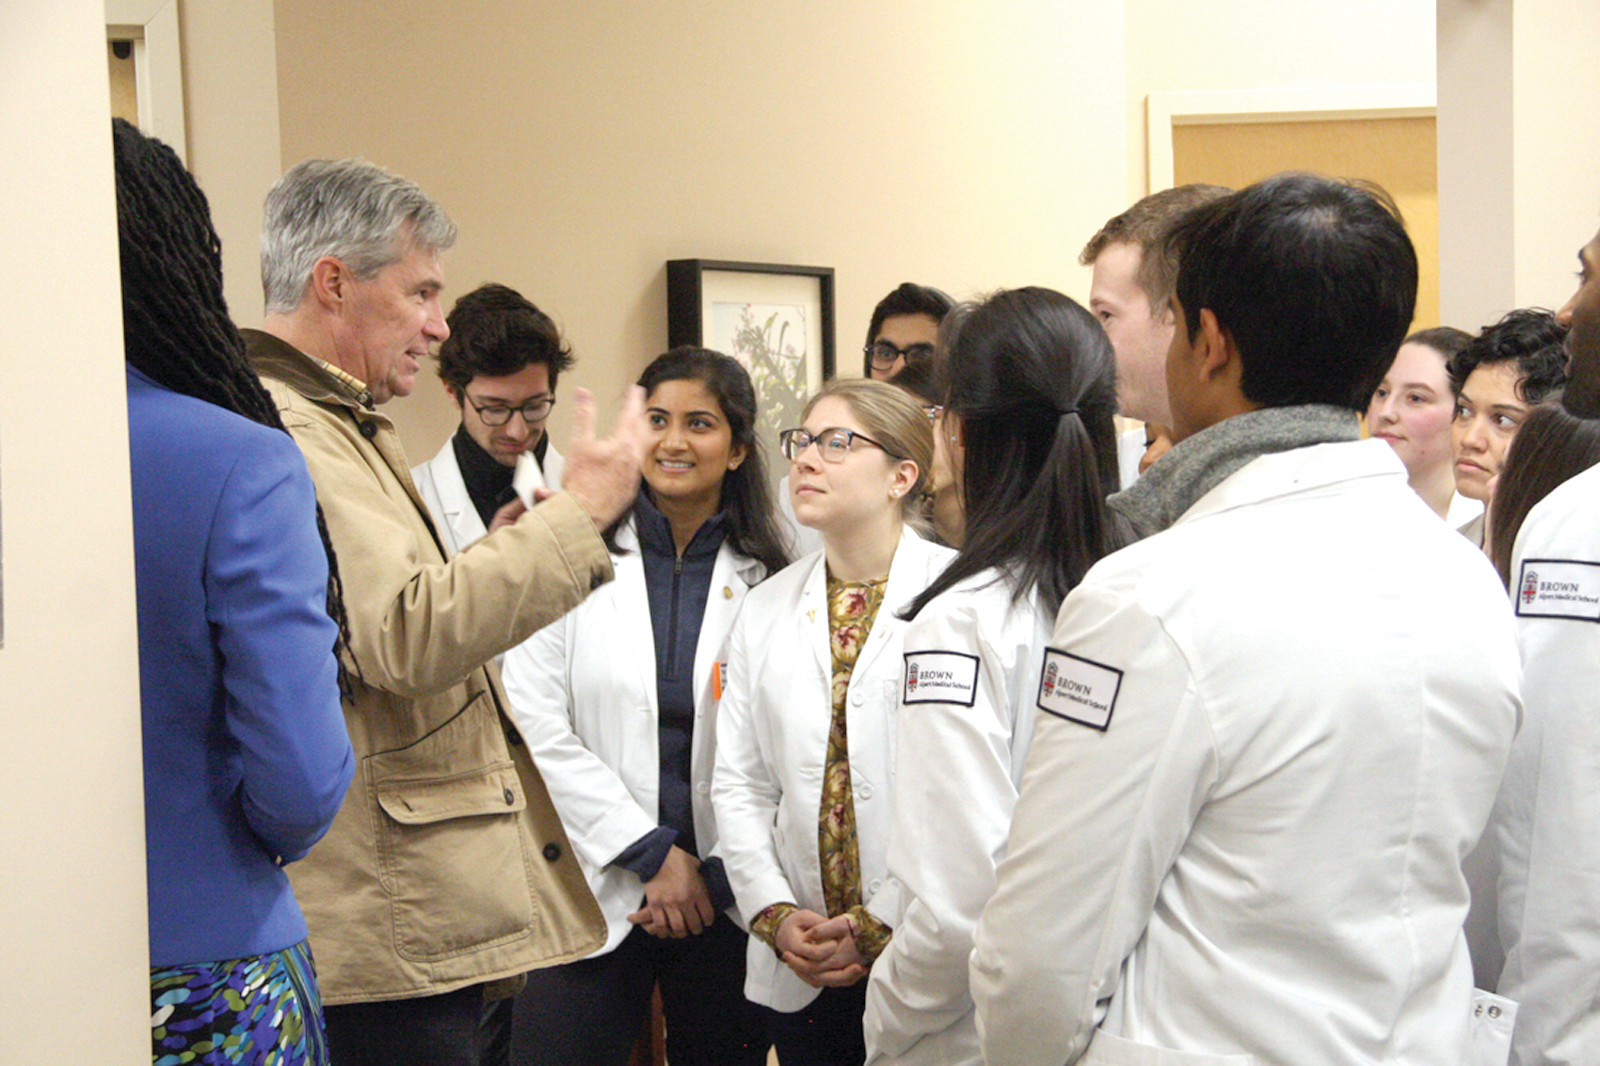 POLITICS AND MEDICINE: Senator Sheldon Whitehouse took a moment following Sunday’s rally to talk with Brown University medical students.